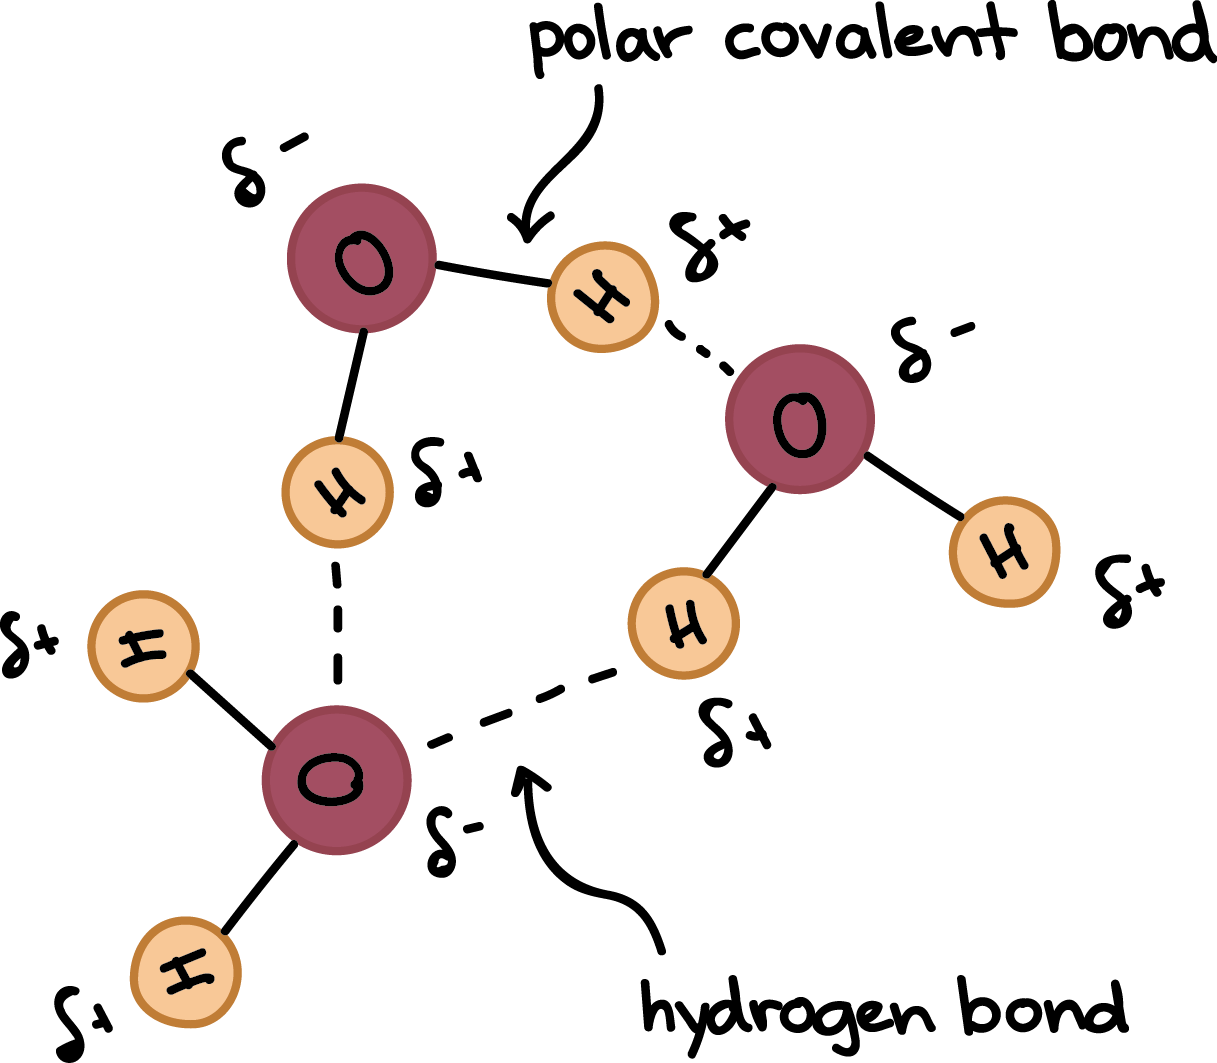 Water molecules forming hydrogen bonds with one another. The partial negative charge on the O of one molecule can form a hydrogen bond with the partial positive charge on the hydrogens of other molecules.